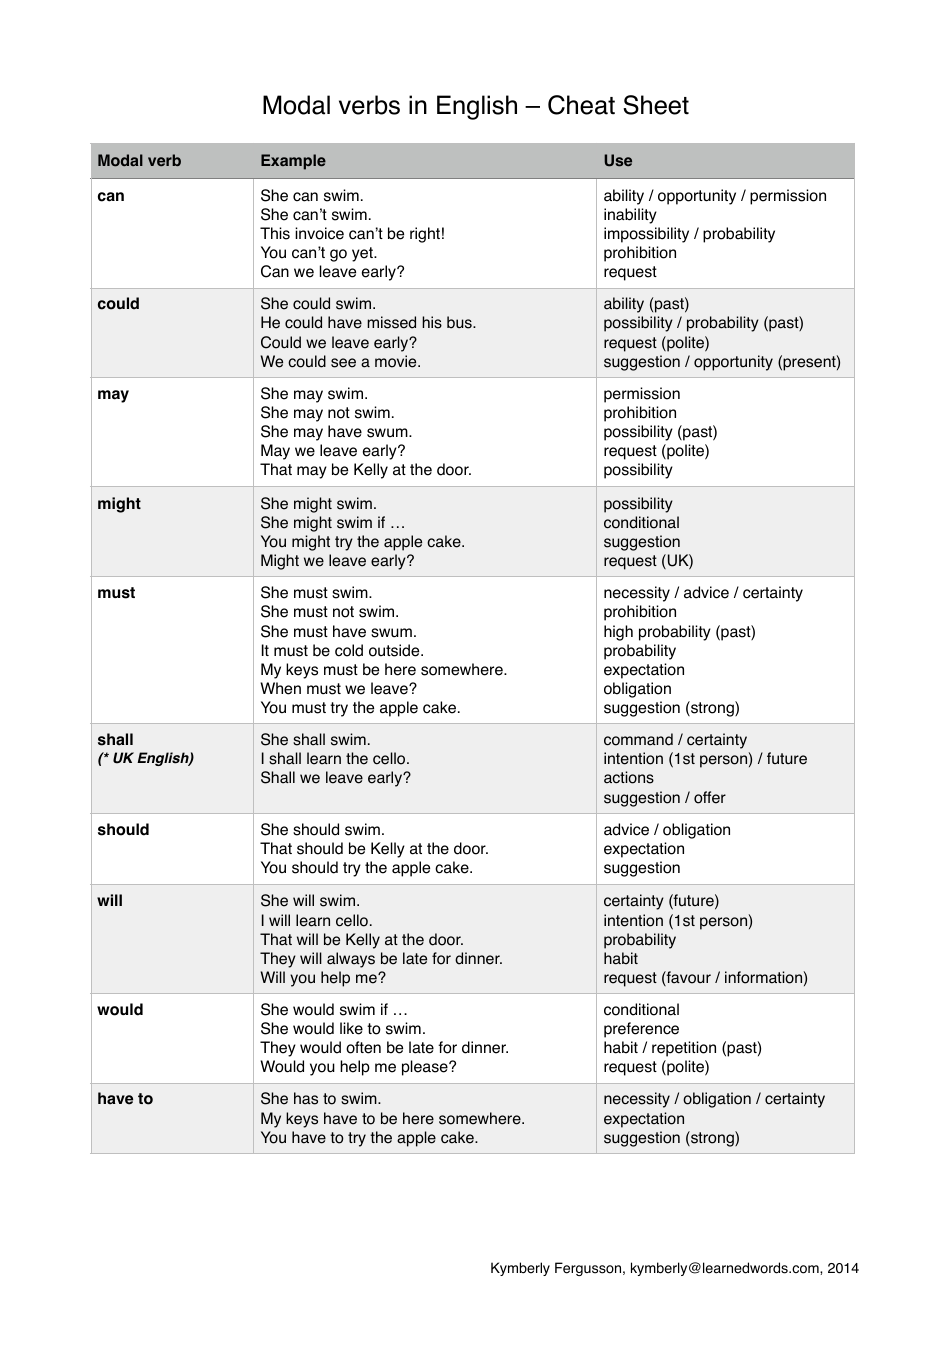 Modal Verbs in English Cheat Sheet - Preview Image